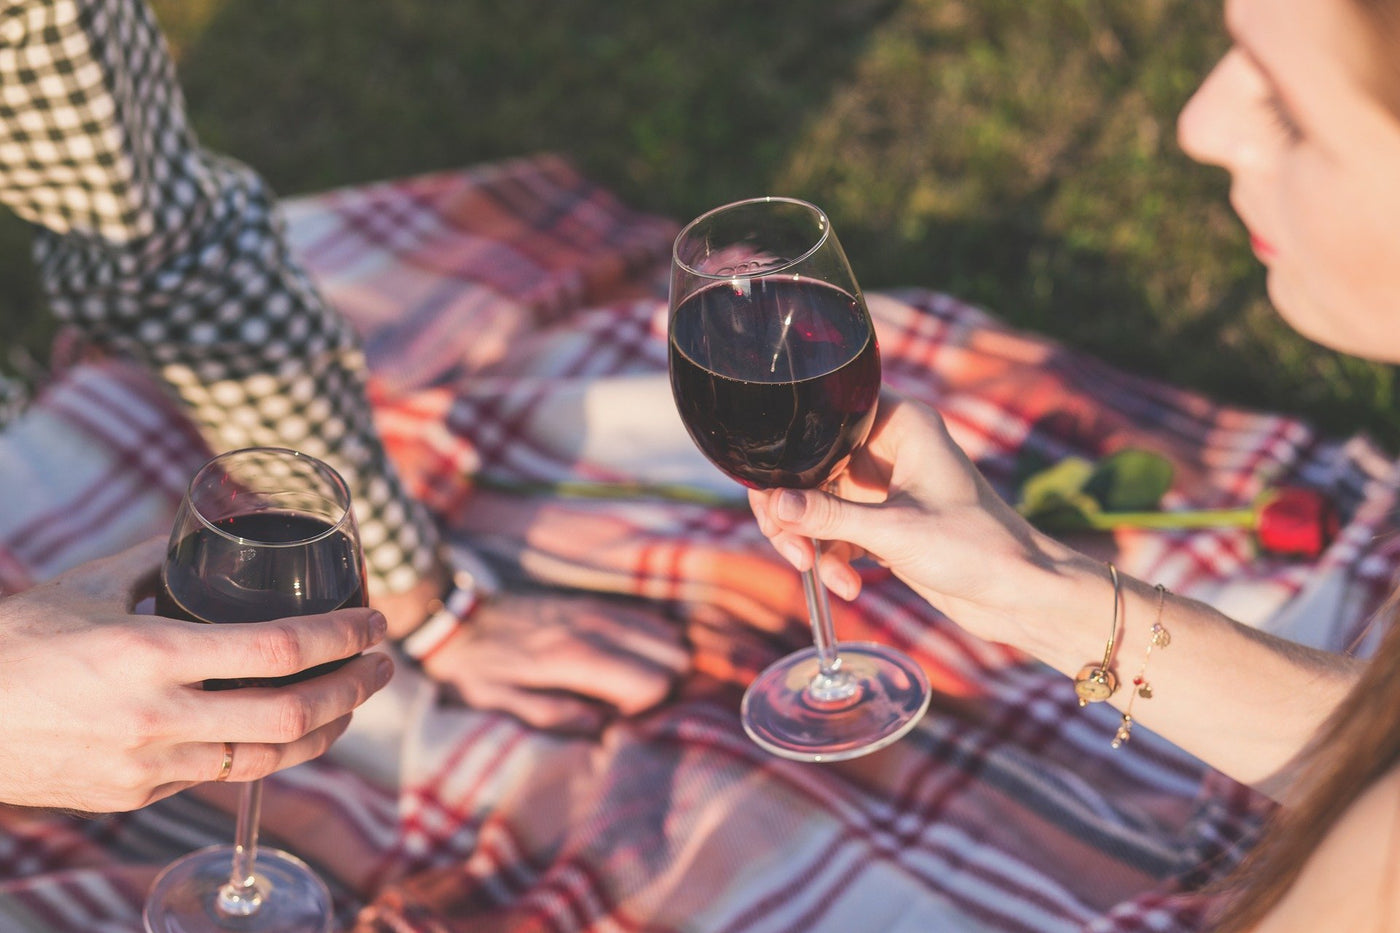 People sitting in a park having a picnic and enjoying a glass of red wine